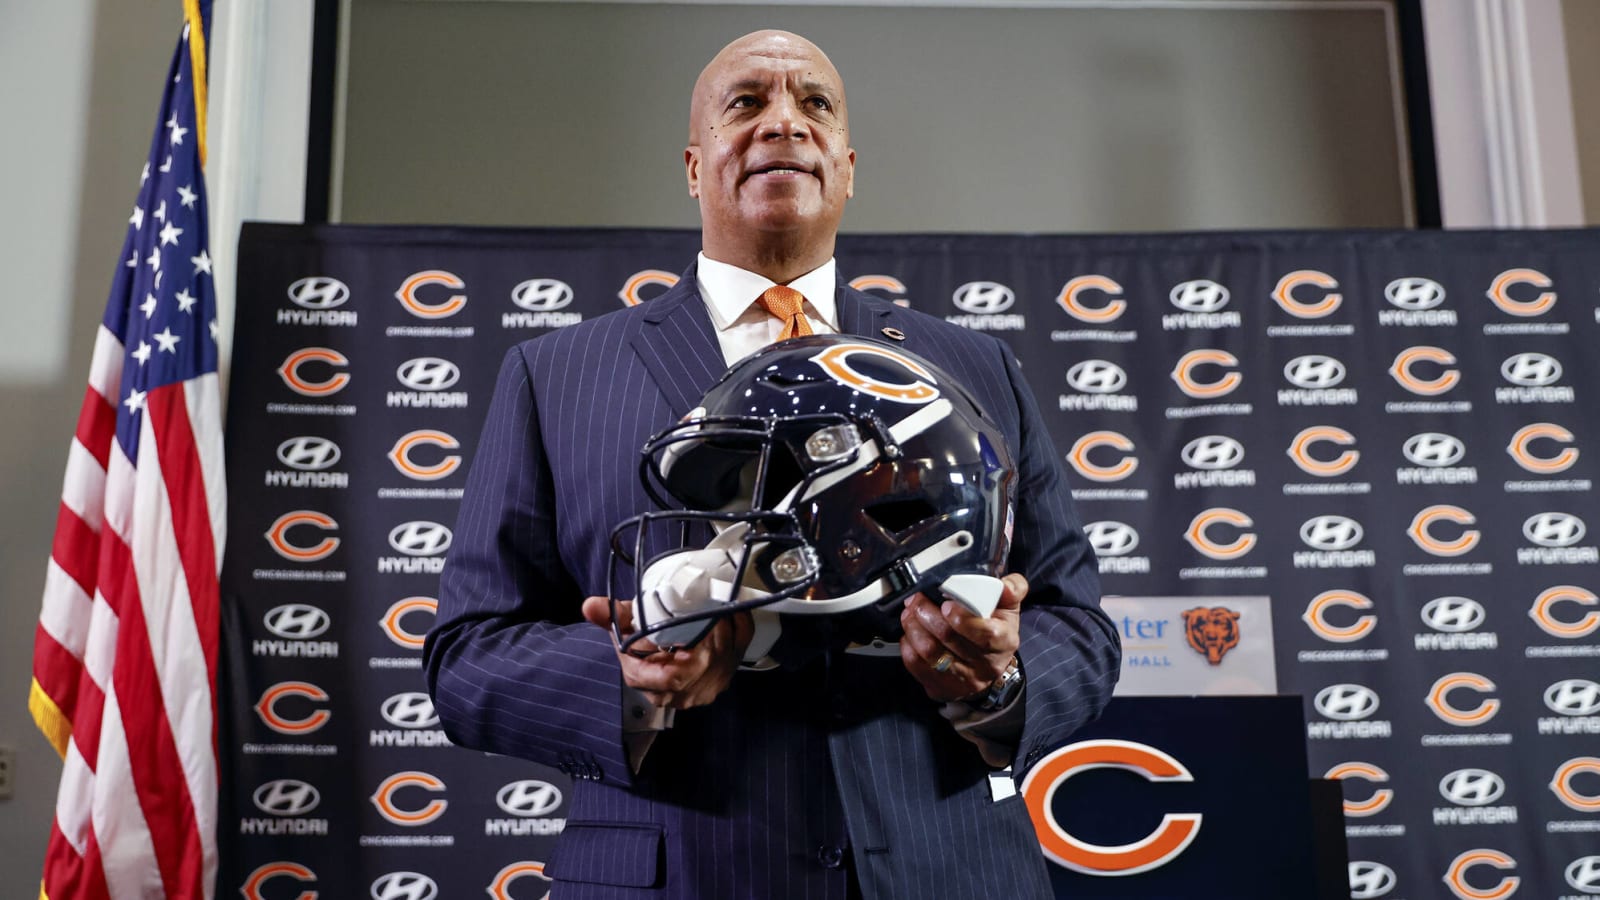 Chicago Bears ‘Focused’ Only on New Stadium in Arlington Heights